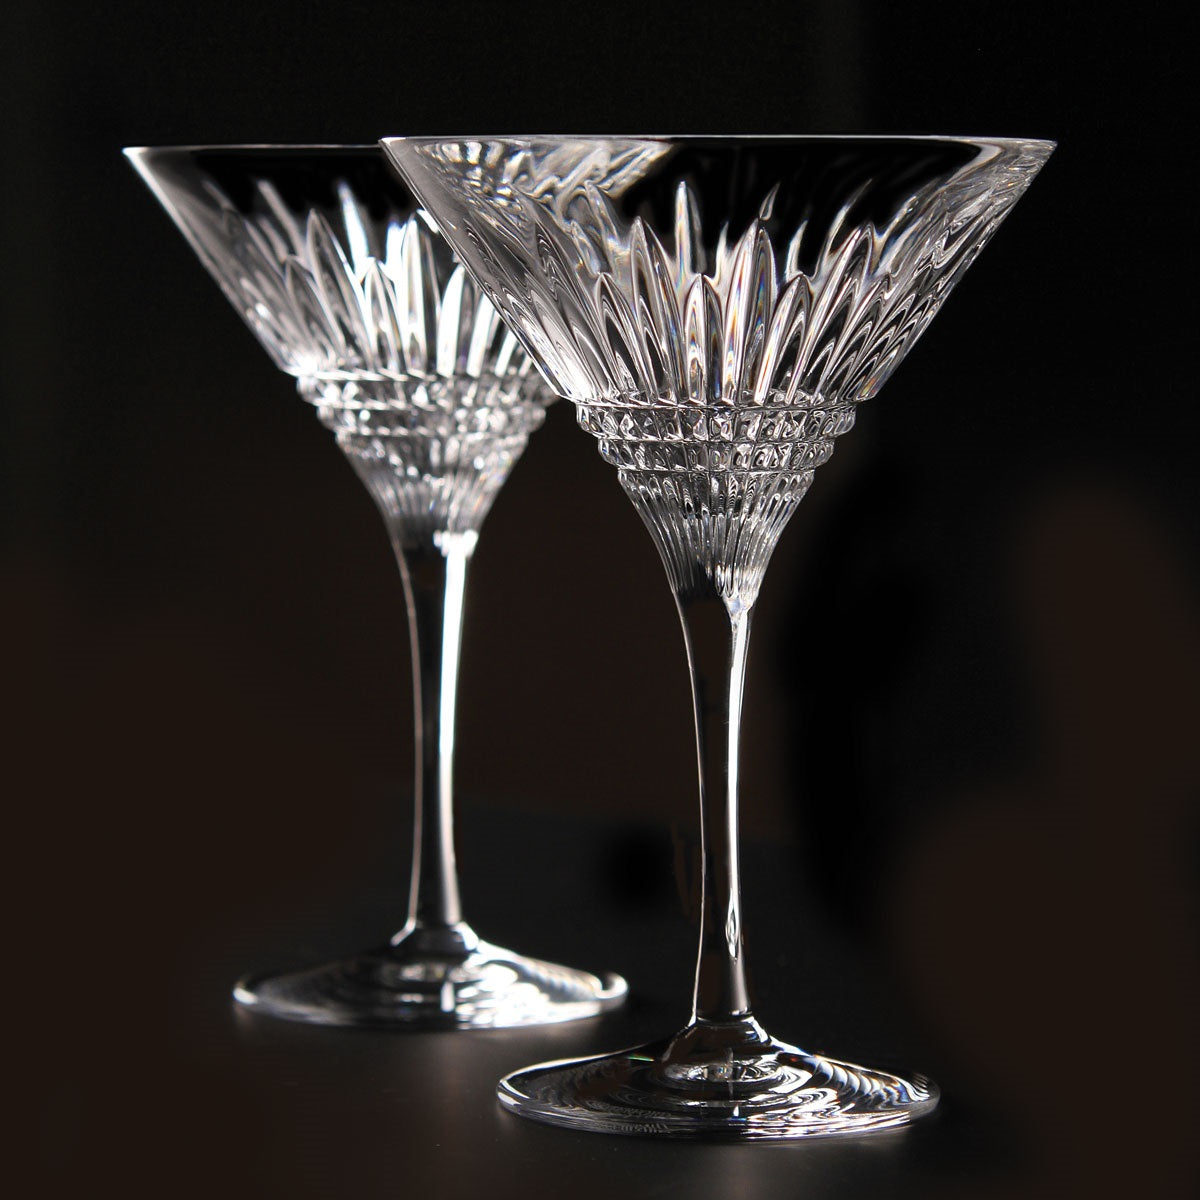 Waterford Crystal Lismore Diamond Martini Glasses Pair  The Lismore Diamond pattern is a strikingly modern reinvention of the Waterford classic: characterized by intricate diamond cuts rendered in radiant fine crystal. The clarity of this radiant Lismore Diamond Martini Glass Pair, ensures that the rich colour of its contents is highlighted beautifully: serving as a feast for the eye as well as the palette.